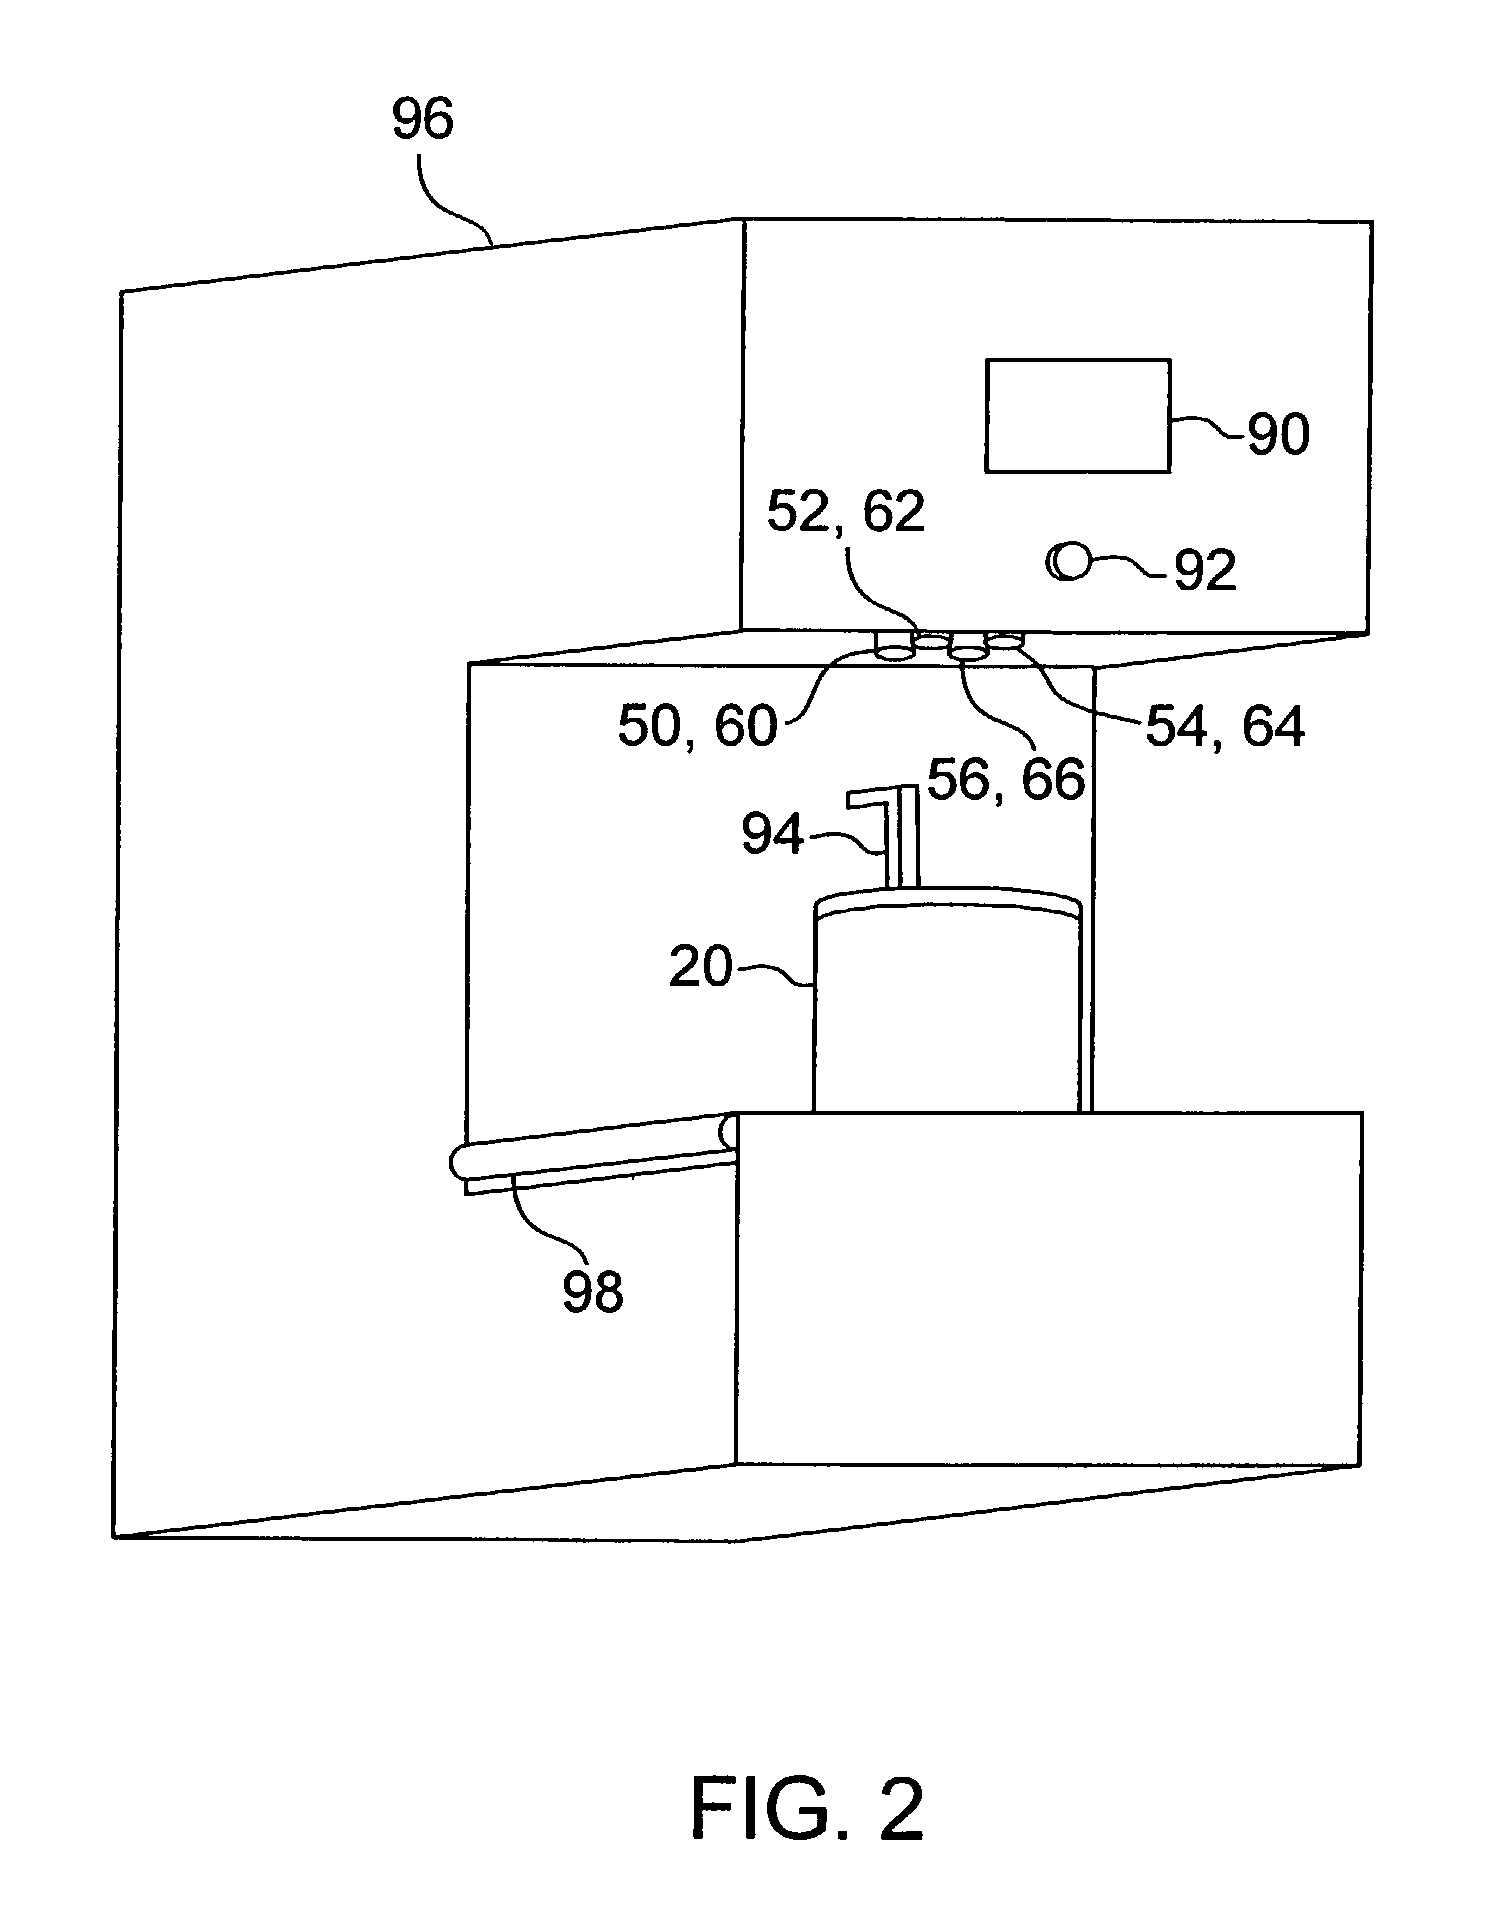 Method and apparatus for producing an aqueous paint composition from a plurality of premixed compositions